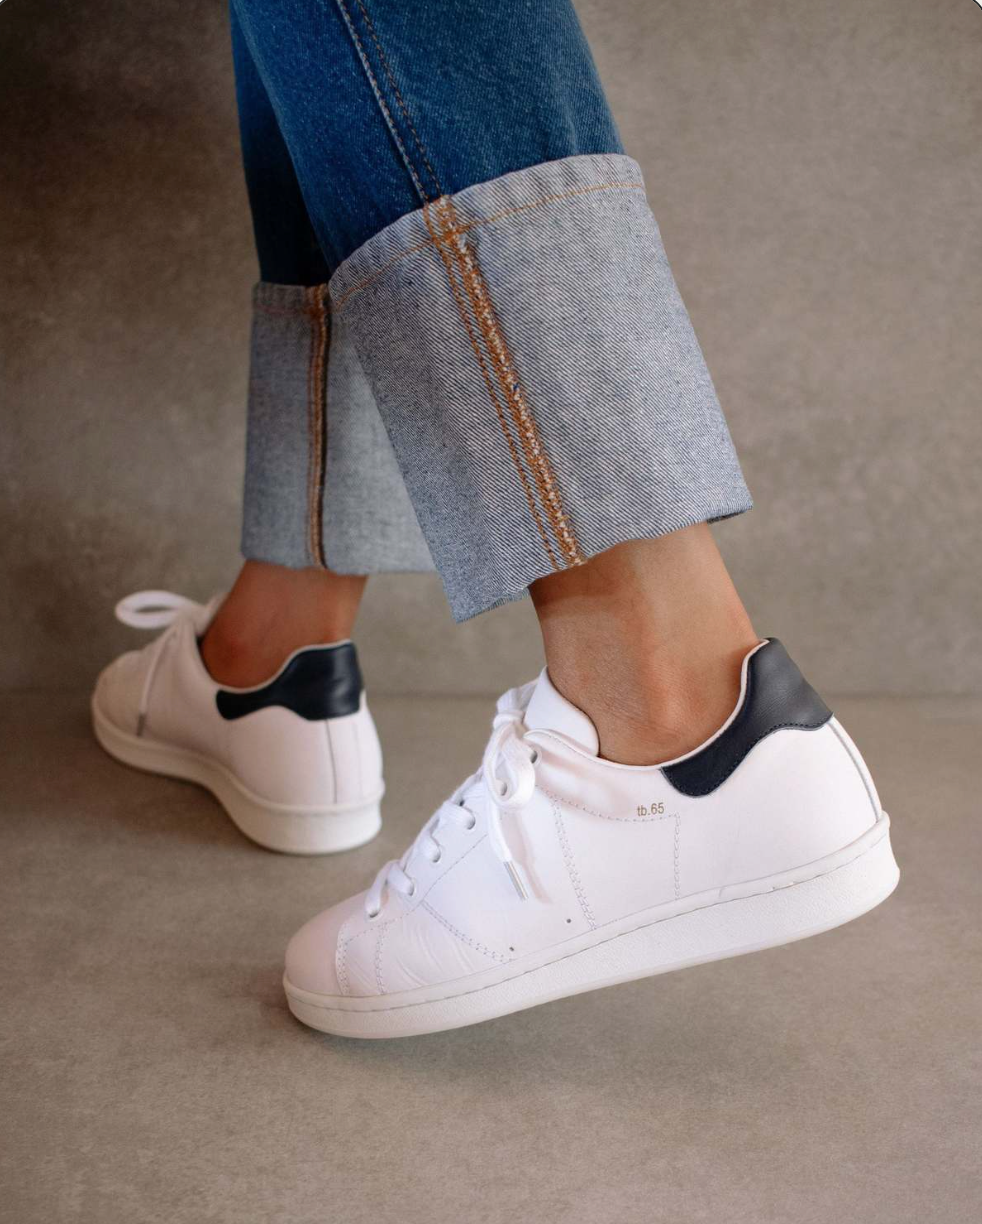 ALOHAS tb.65 Sneaker Bright White Navy-Sneakers-West of Woodward Boutique-Vancouver-Canada